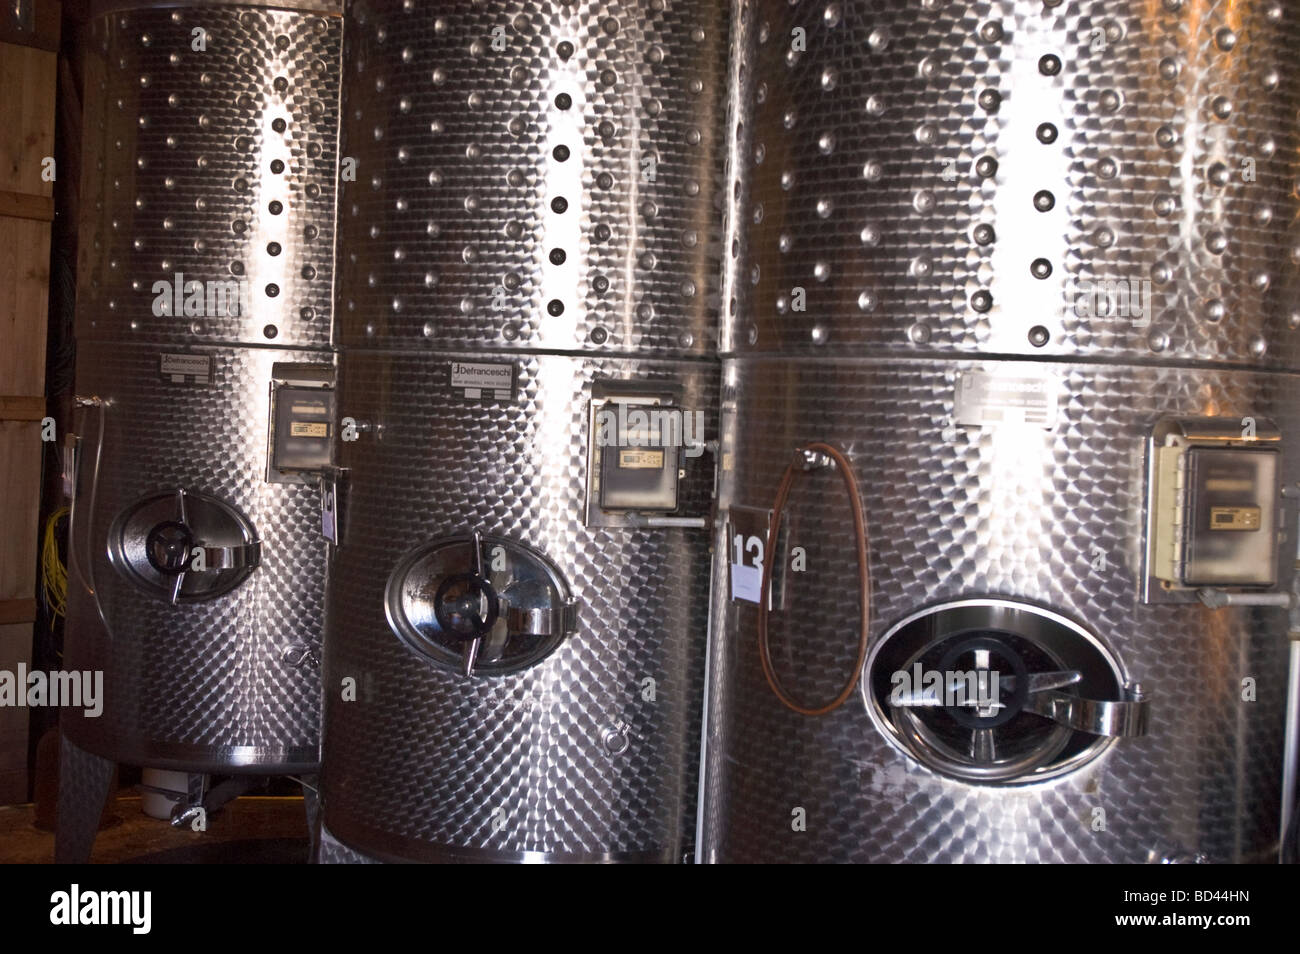 Stainless steel vats for wine production in Finger Lakes winery, Cayuga lake, New York, USA Stock Photo